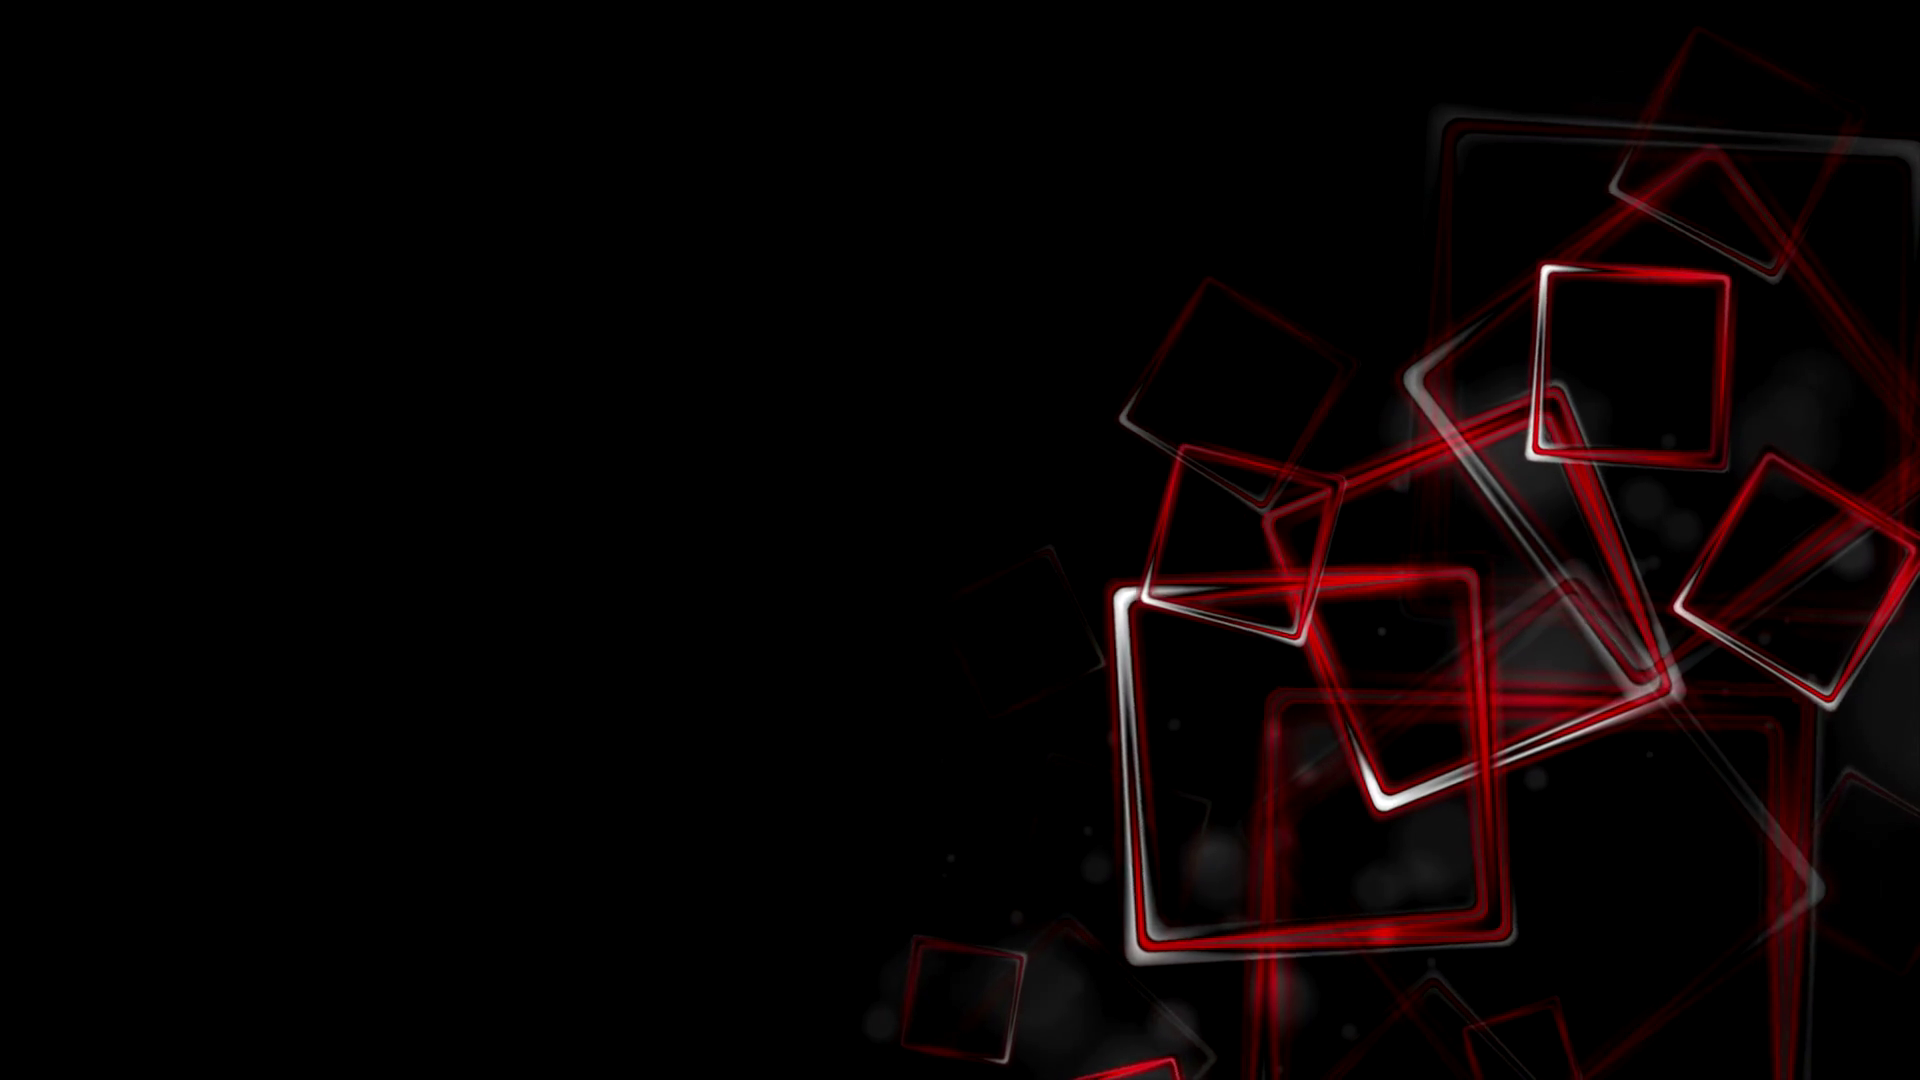 Dark Red Glossy Squares Abstract Motion Design 4k Black Ultra HD